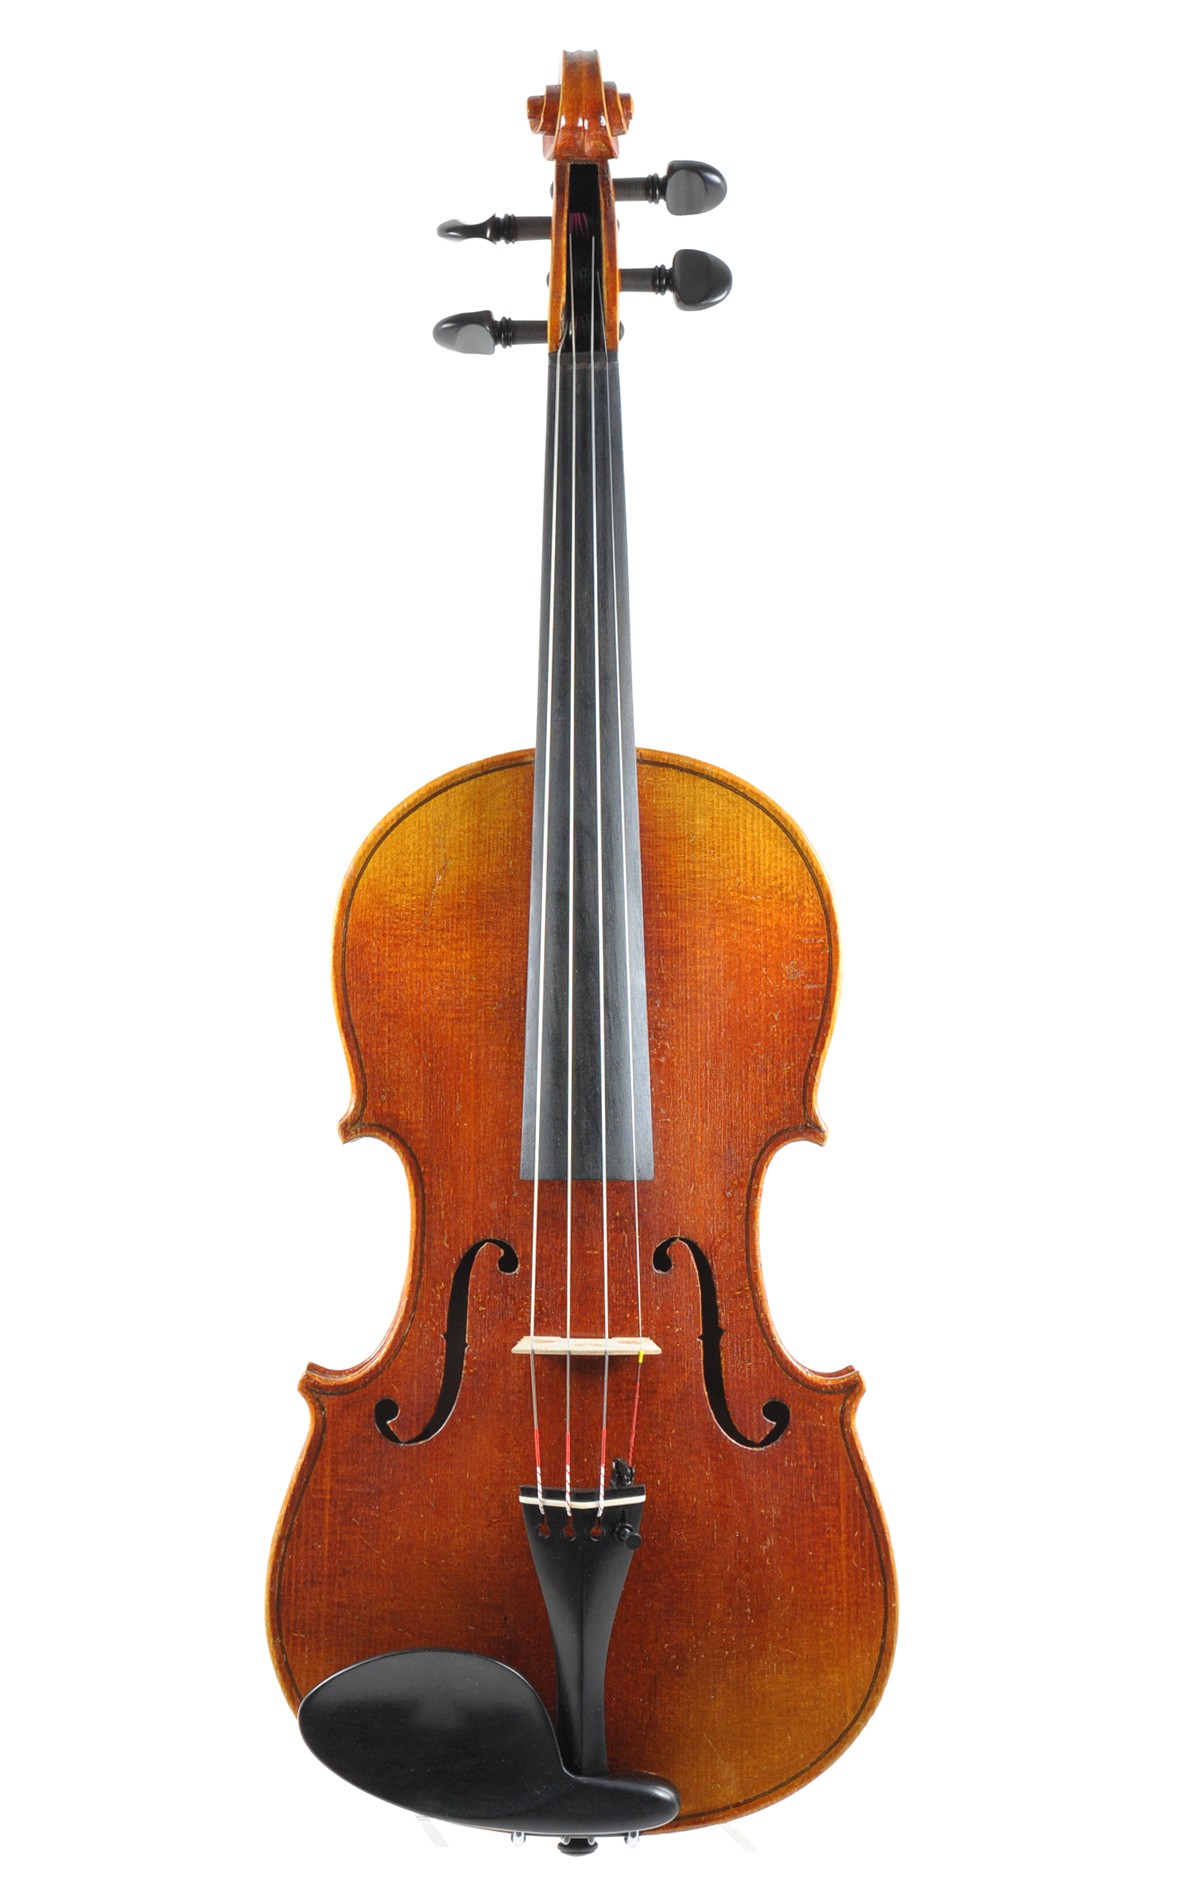 Student violin from Klingenthal, approx. 1850 - front view